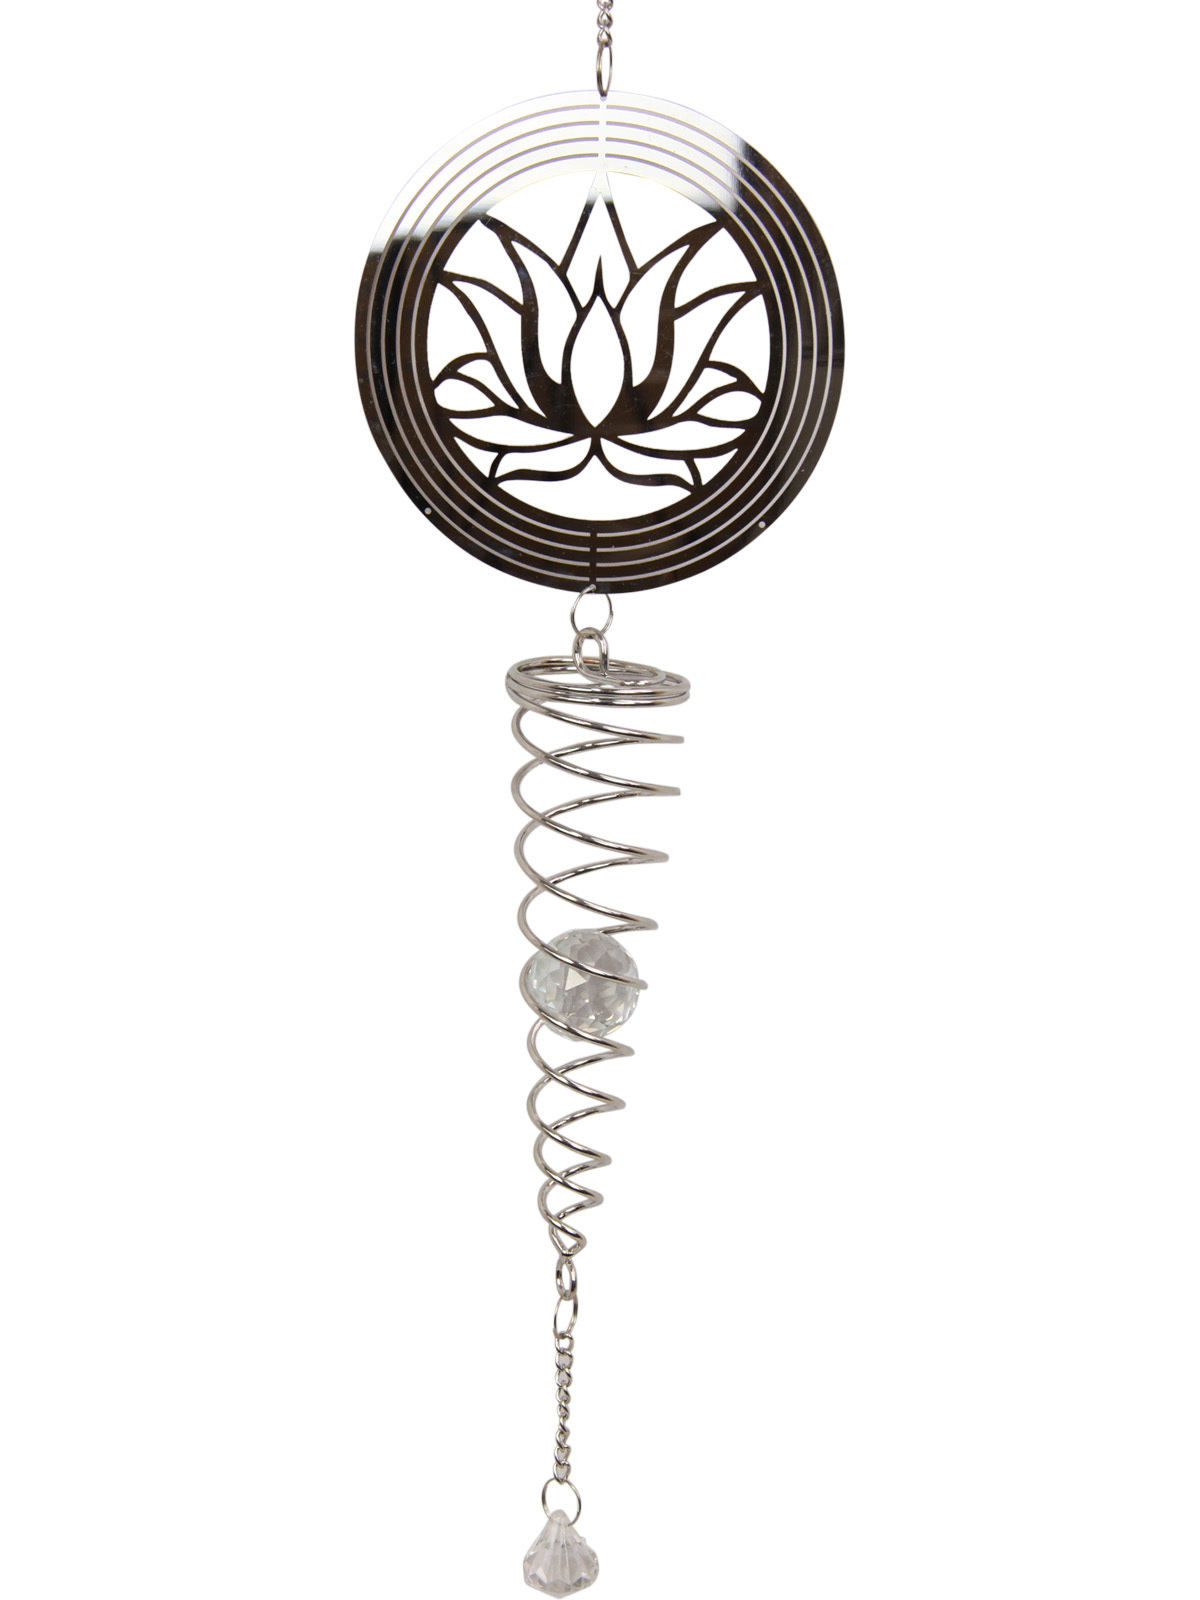 Vortex Spinner Chime 70cm Silver Lotus Illusion Metal And Jewel Hanging Decor